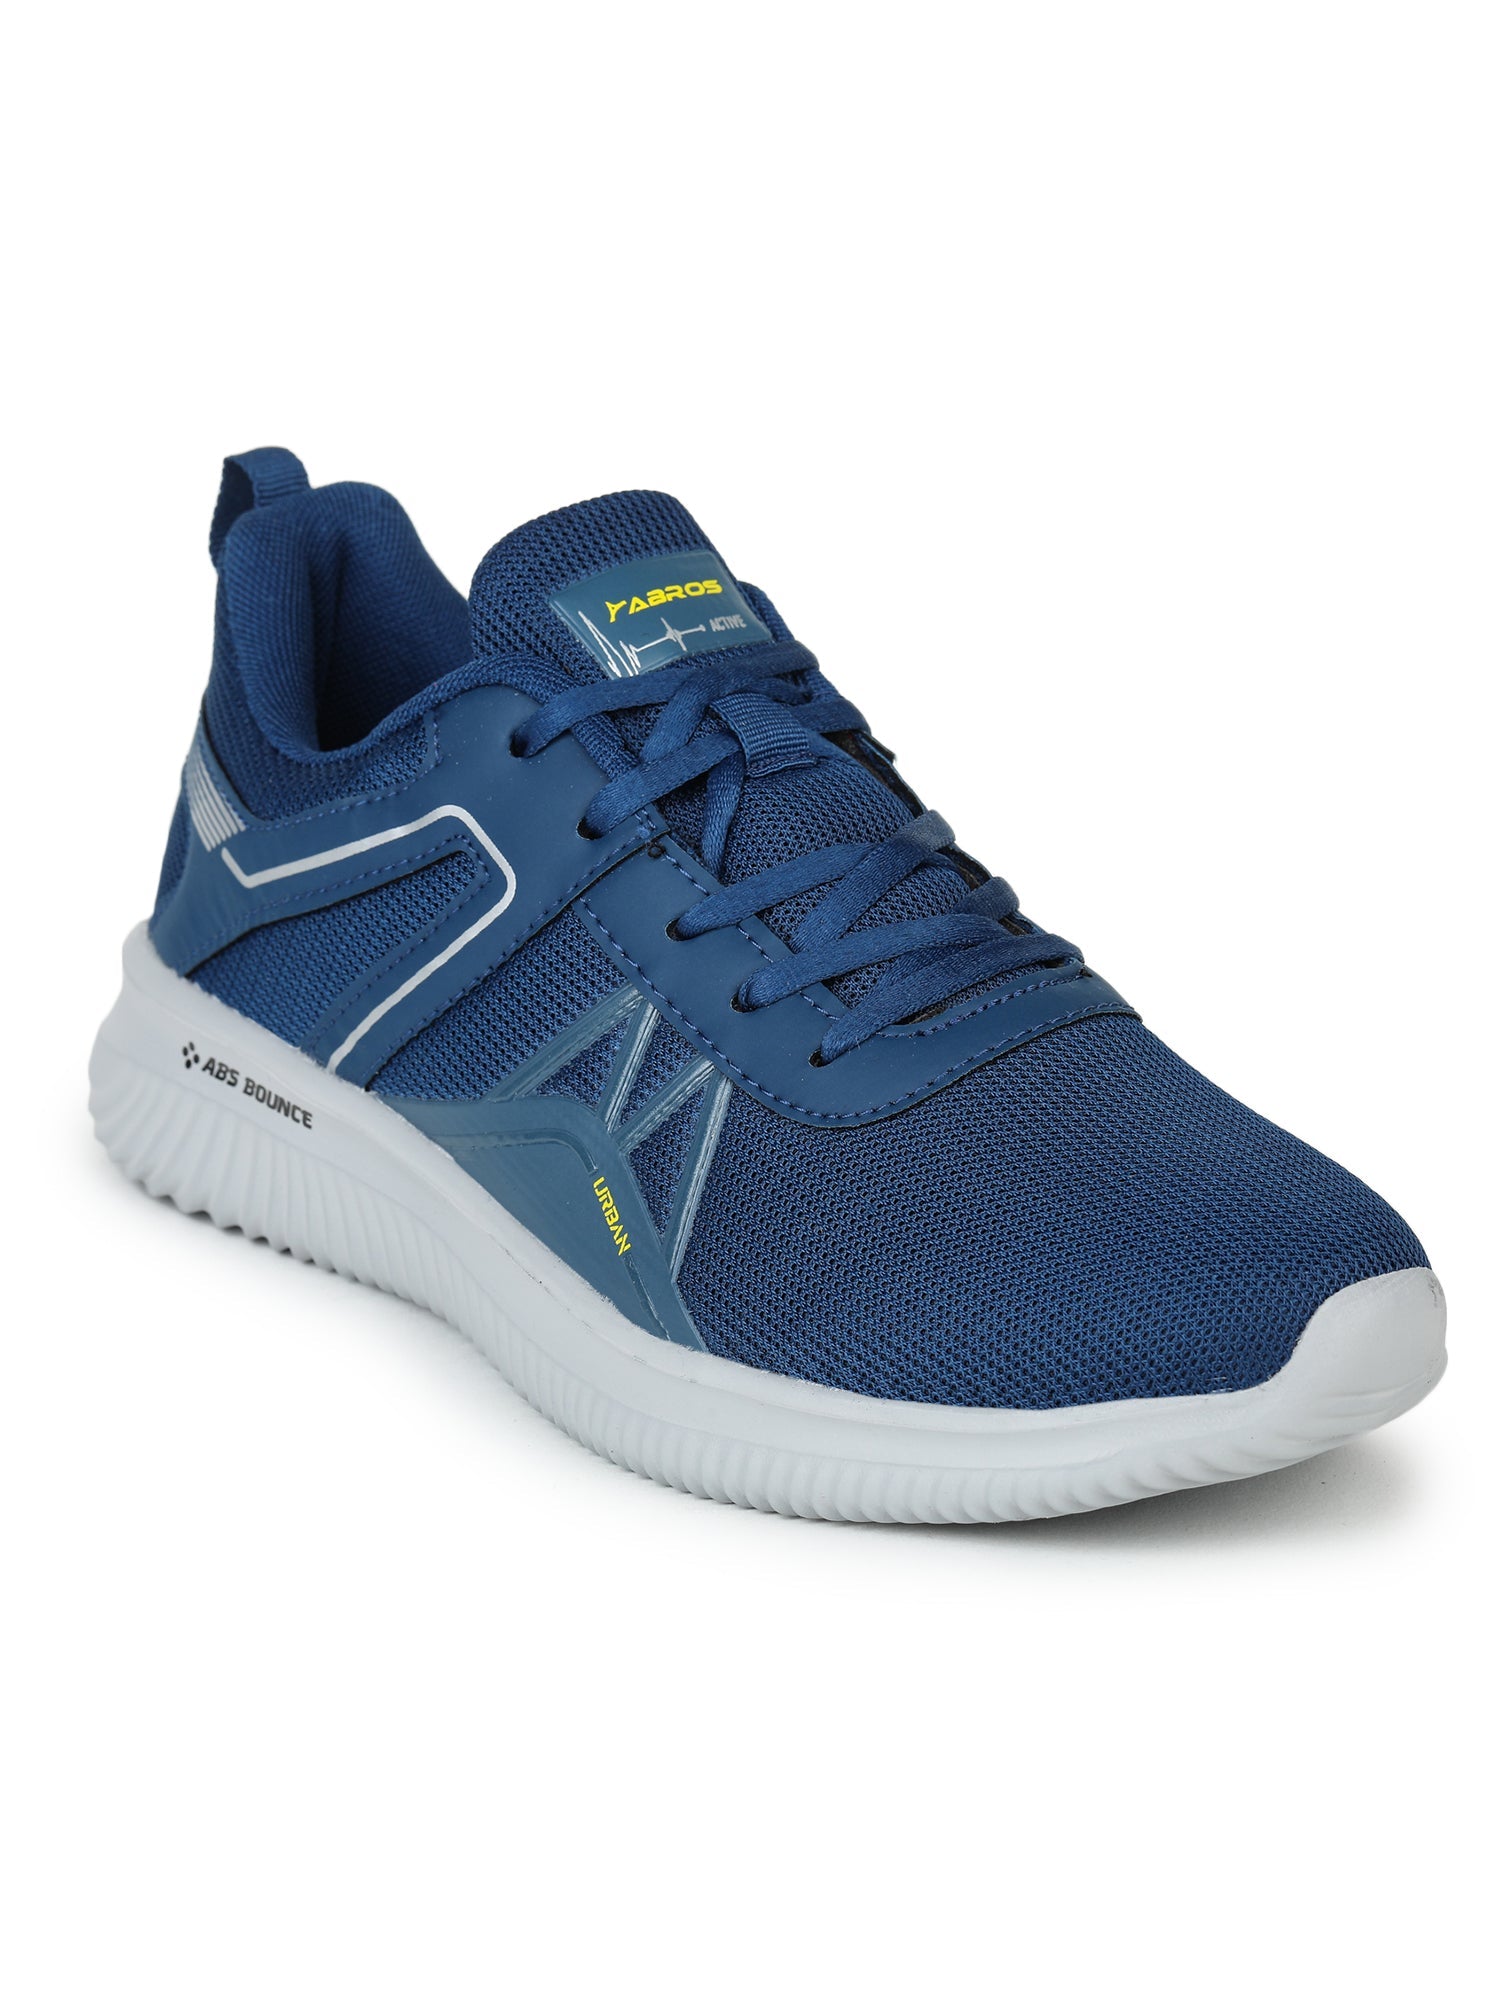 SMITH SPORT-SHOES For MEN'S